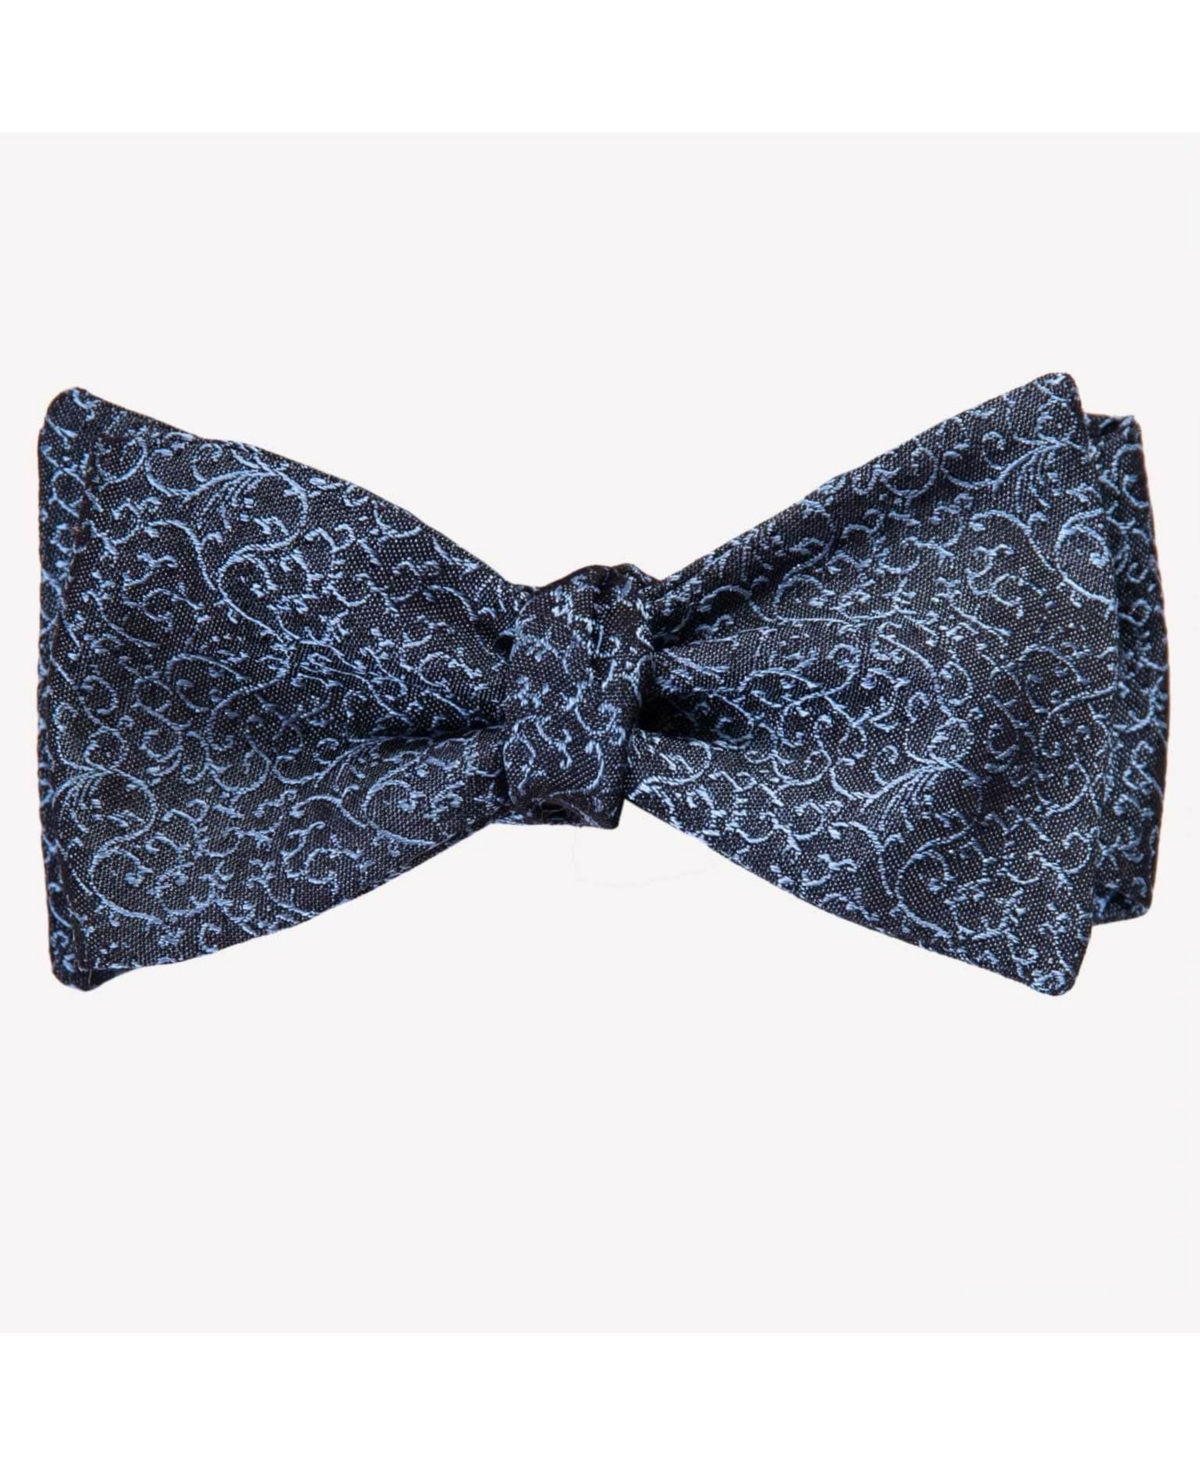 Paloma - Silk Bow Tie for Men - Blue